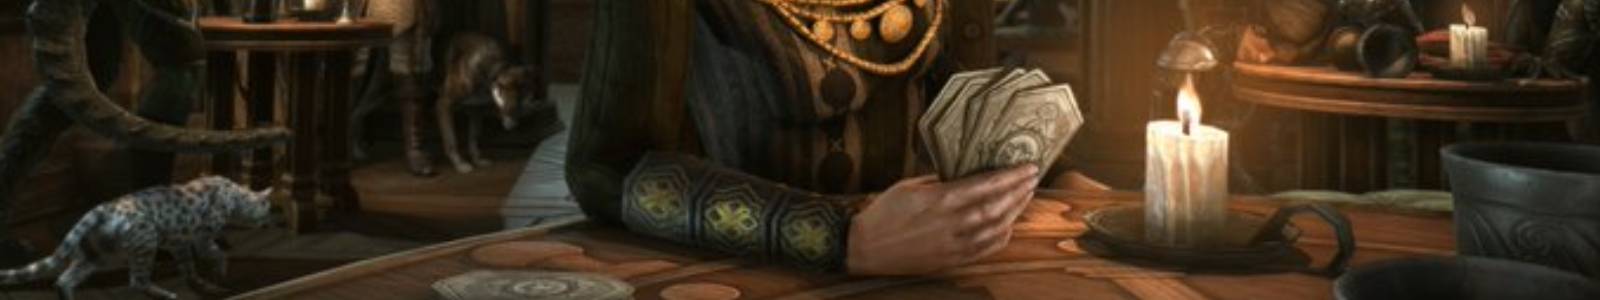 Wispheart Totem Clue Tales of Tribute Clue - ESO header